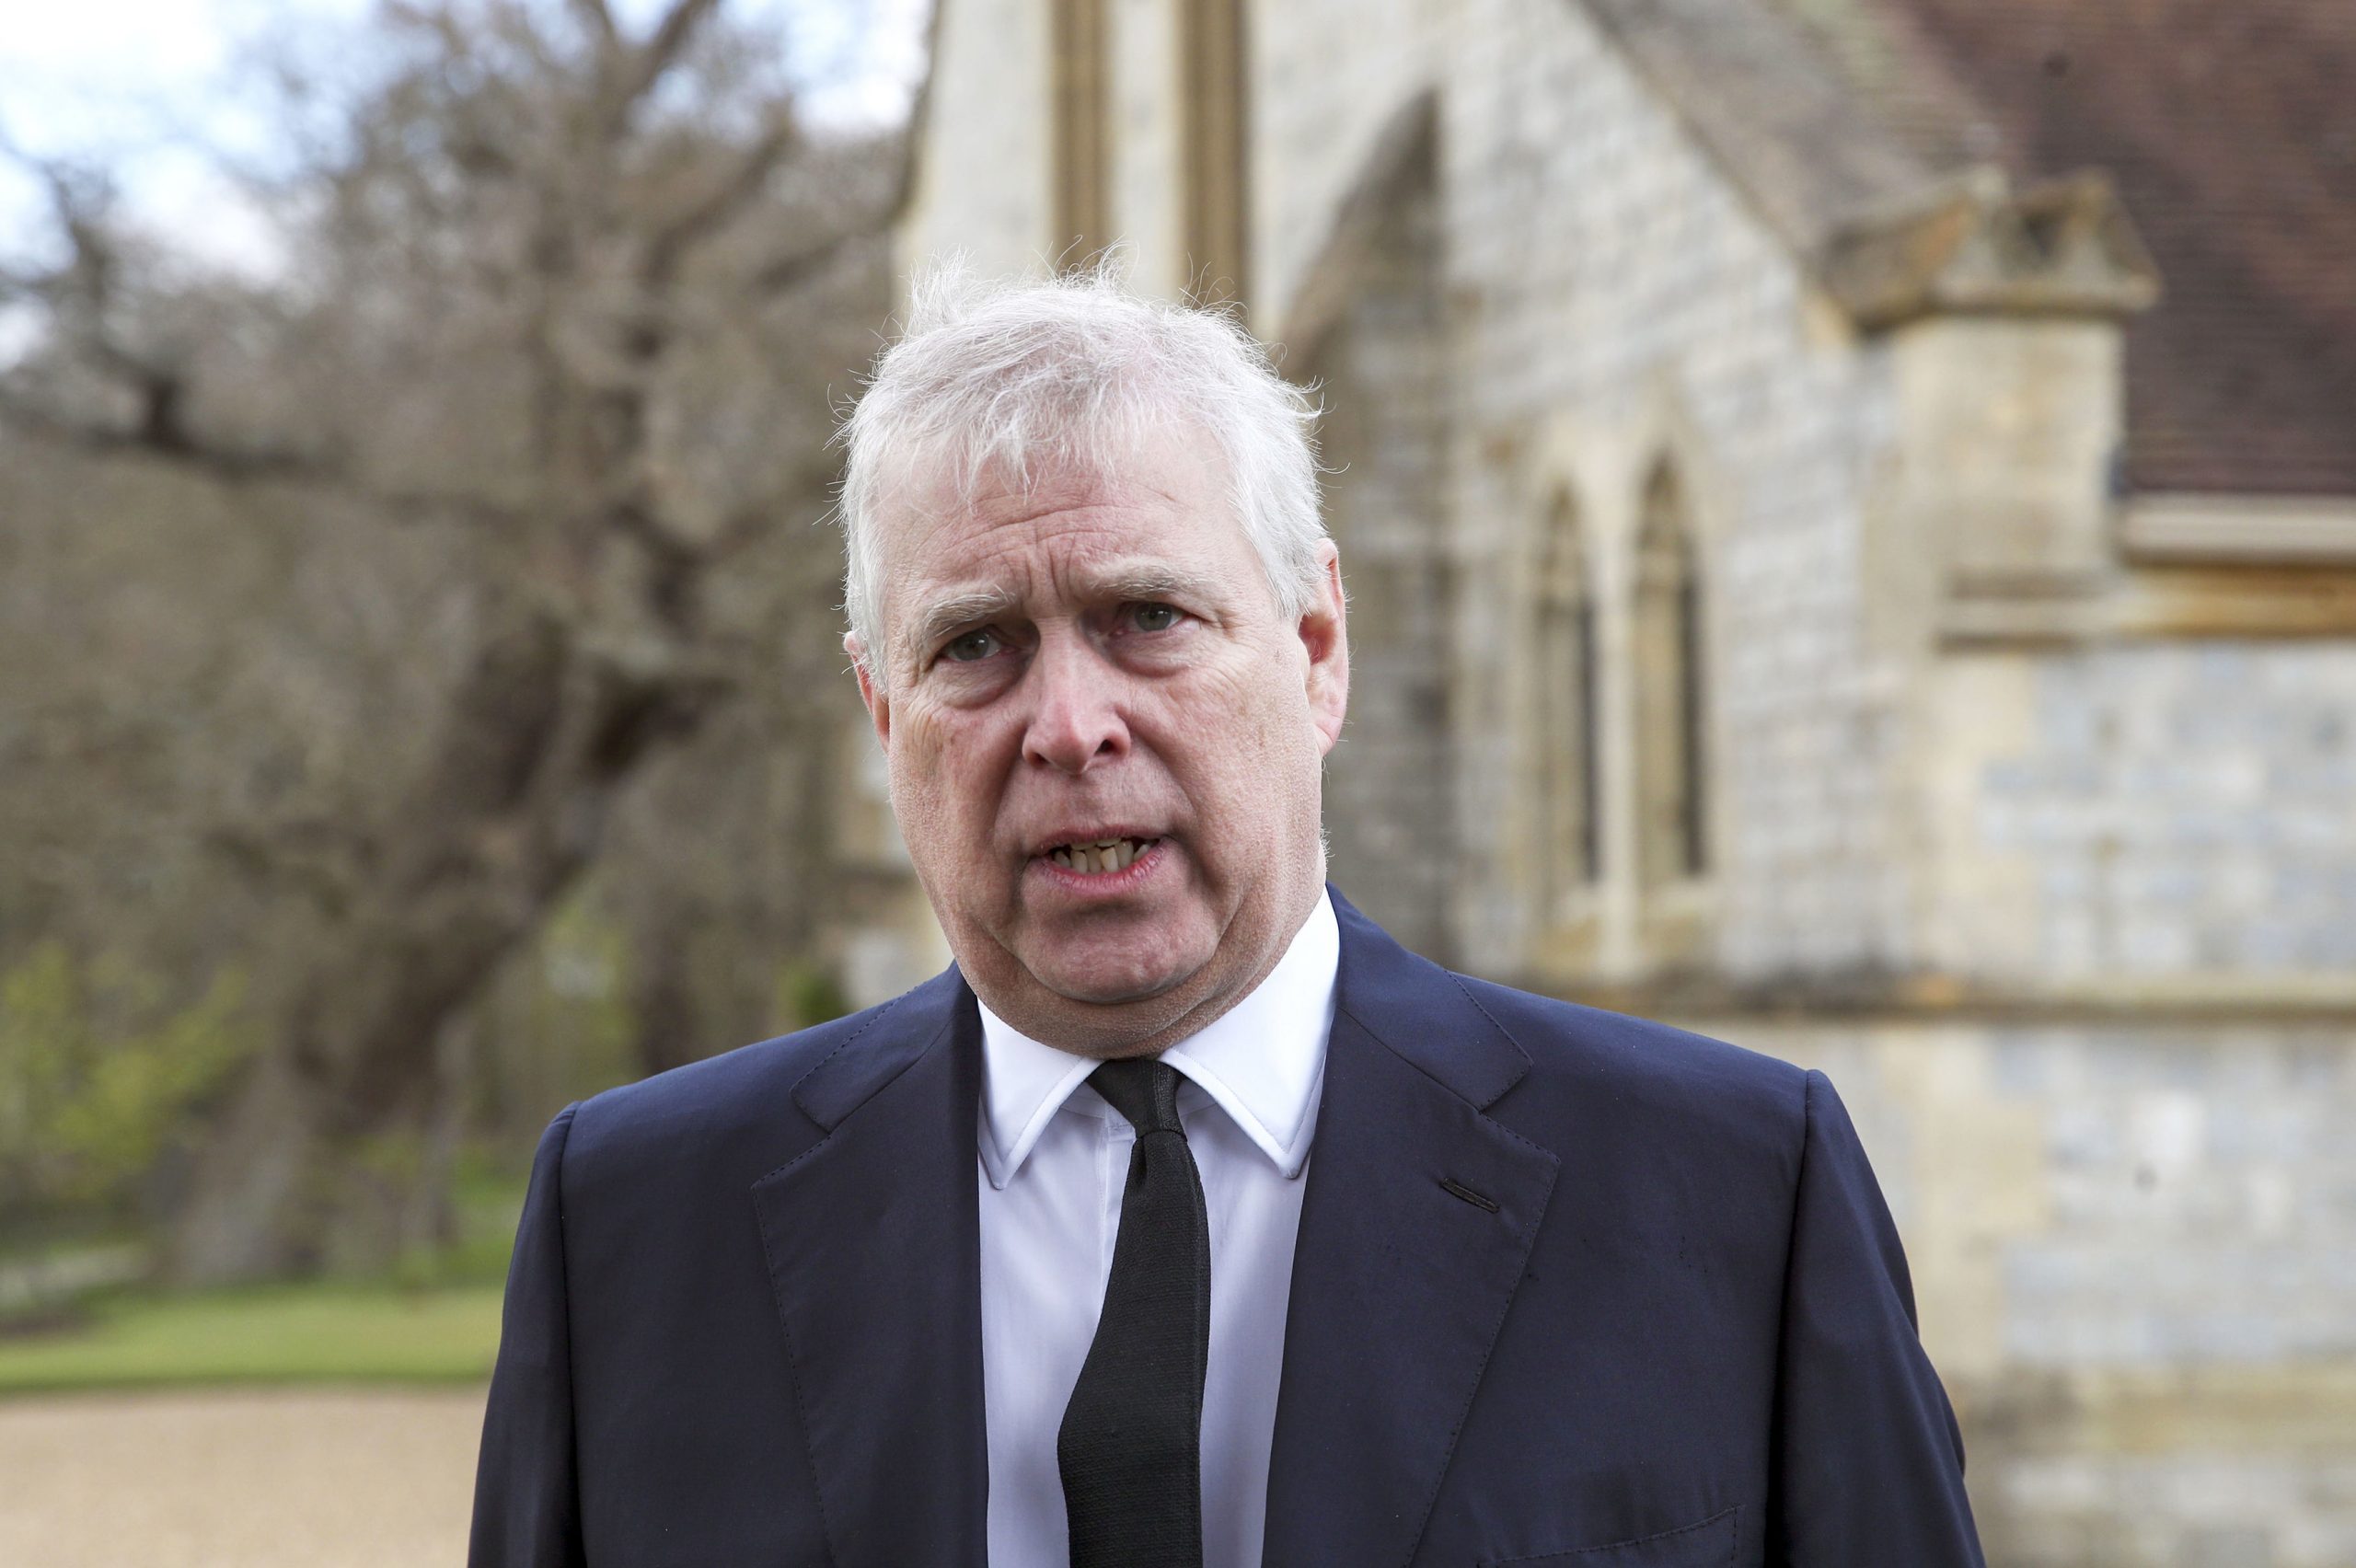 Disgraced royal, Prince Andrew, to give evidence in sex abuse lawsuit in March